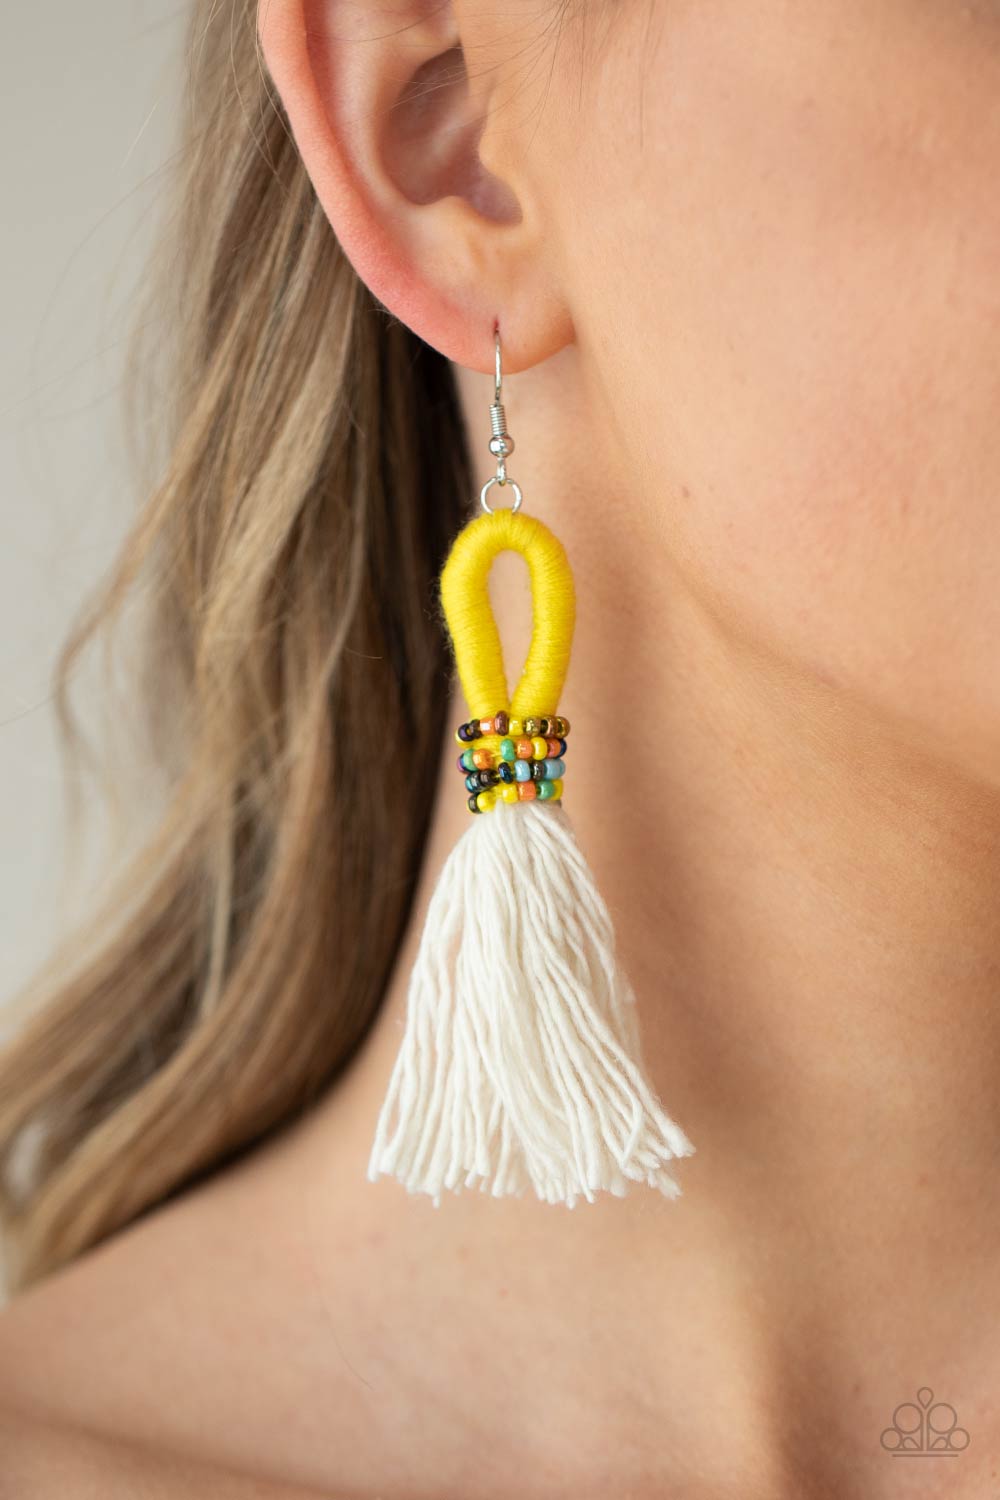 The Dustup Yellow Earring - Paparazzi Accessories  A tassel of soft white cotton fans out under rows of brightly colored seed beads. Anchored by a loop of vibrant yellow floss, the eye-catching style swings from the ear for a show-stopping statement. Earring attaches to a standard fishhook fitting.  All Paparazzi Accessories are lead free and nickel free!  Sold as one pair of earrings.